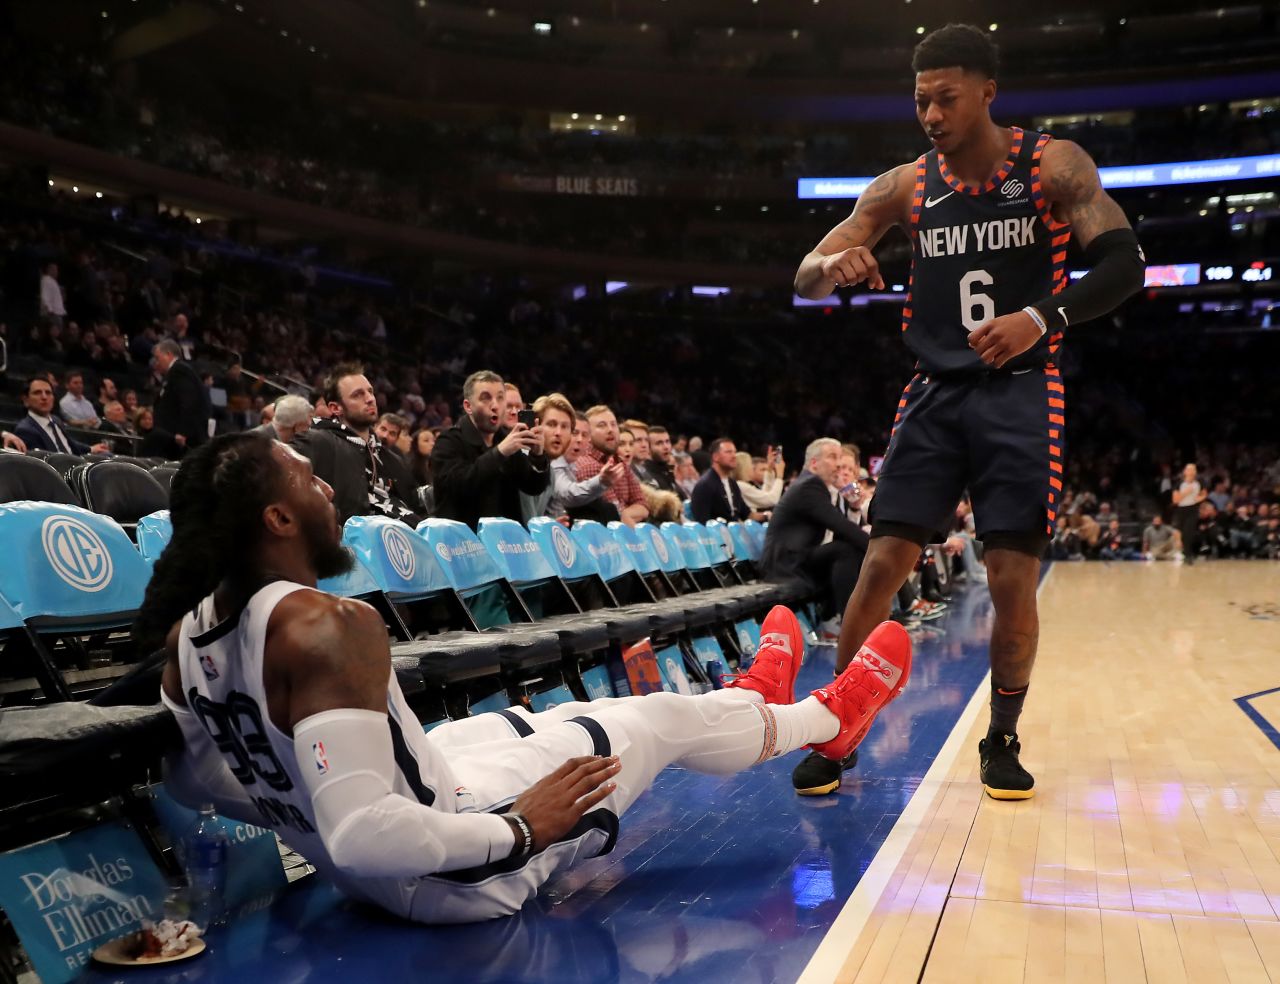 New York's Elfrid Payton shoves Memphis's Jae Crowder during an NBA game in New York on Wednesday, January 29. Payton was upset with Crowder shooting a 3-pointer when the game was already well in hand. Payton was ejected from the game and later suspended by the league.